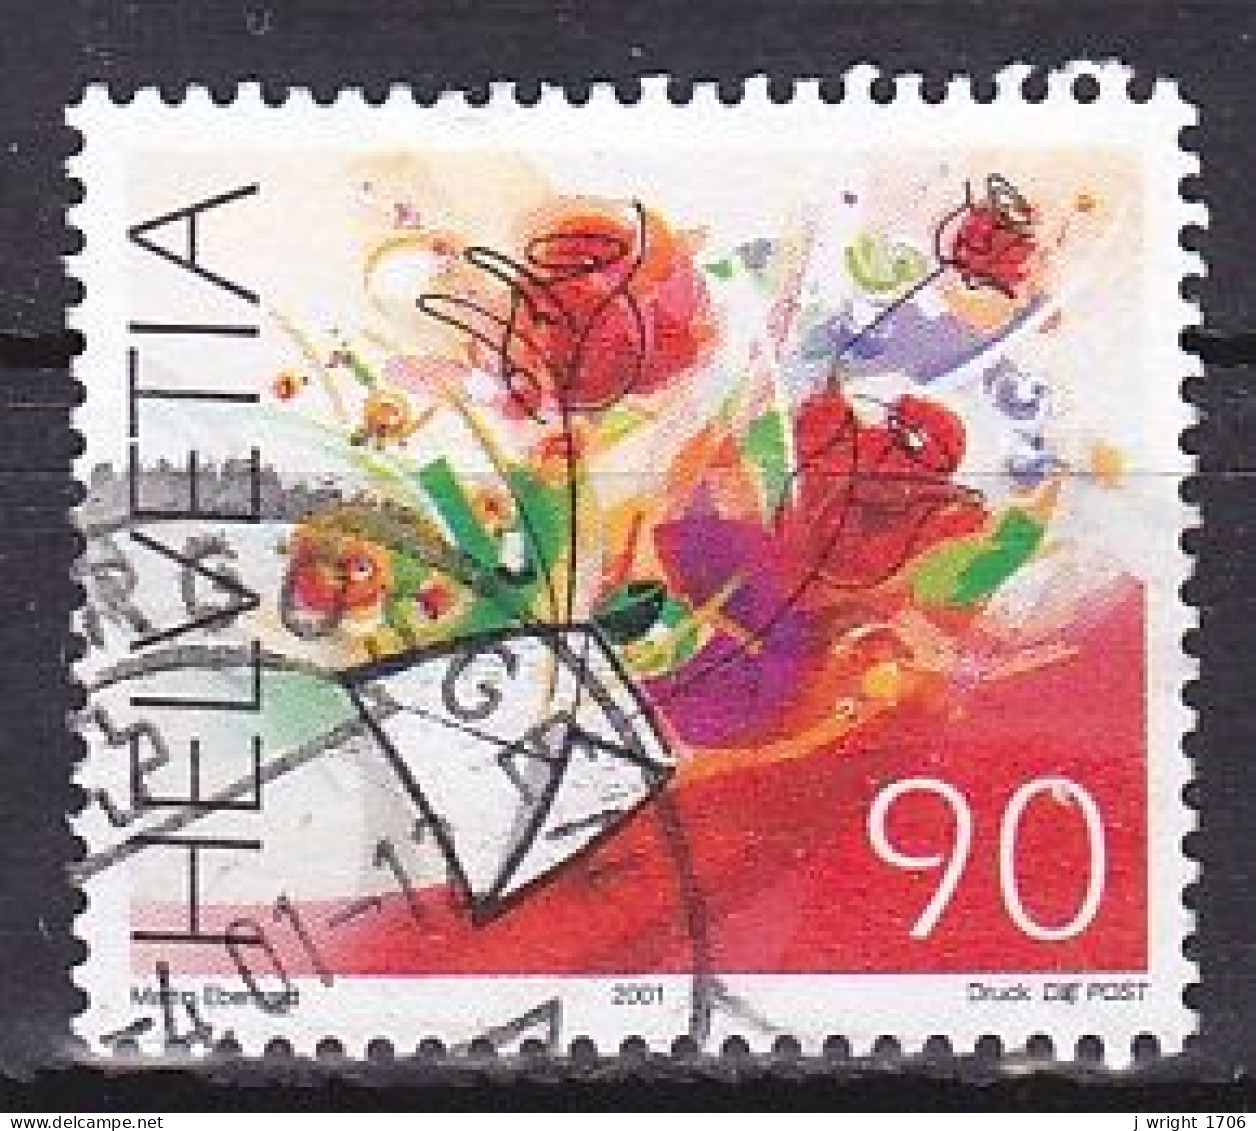 Switzerland, 2001, Congratulations Greetings Stamp, 90c, USED - Used Stamps